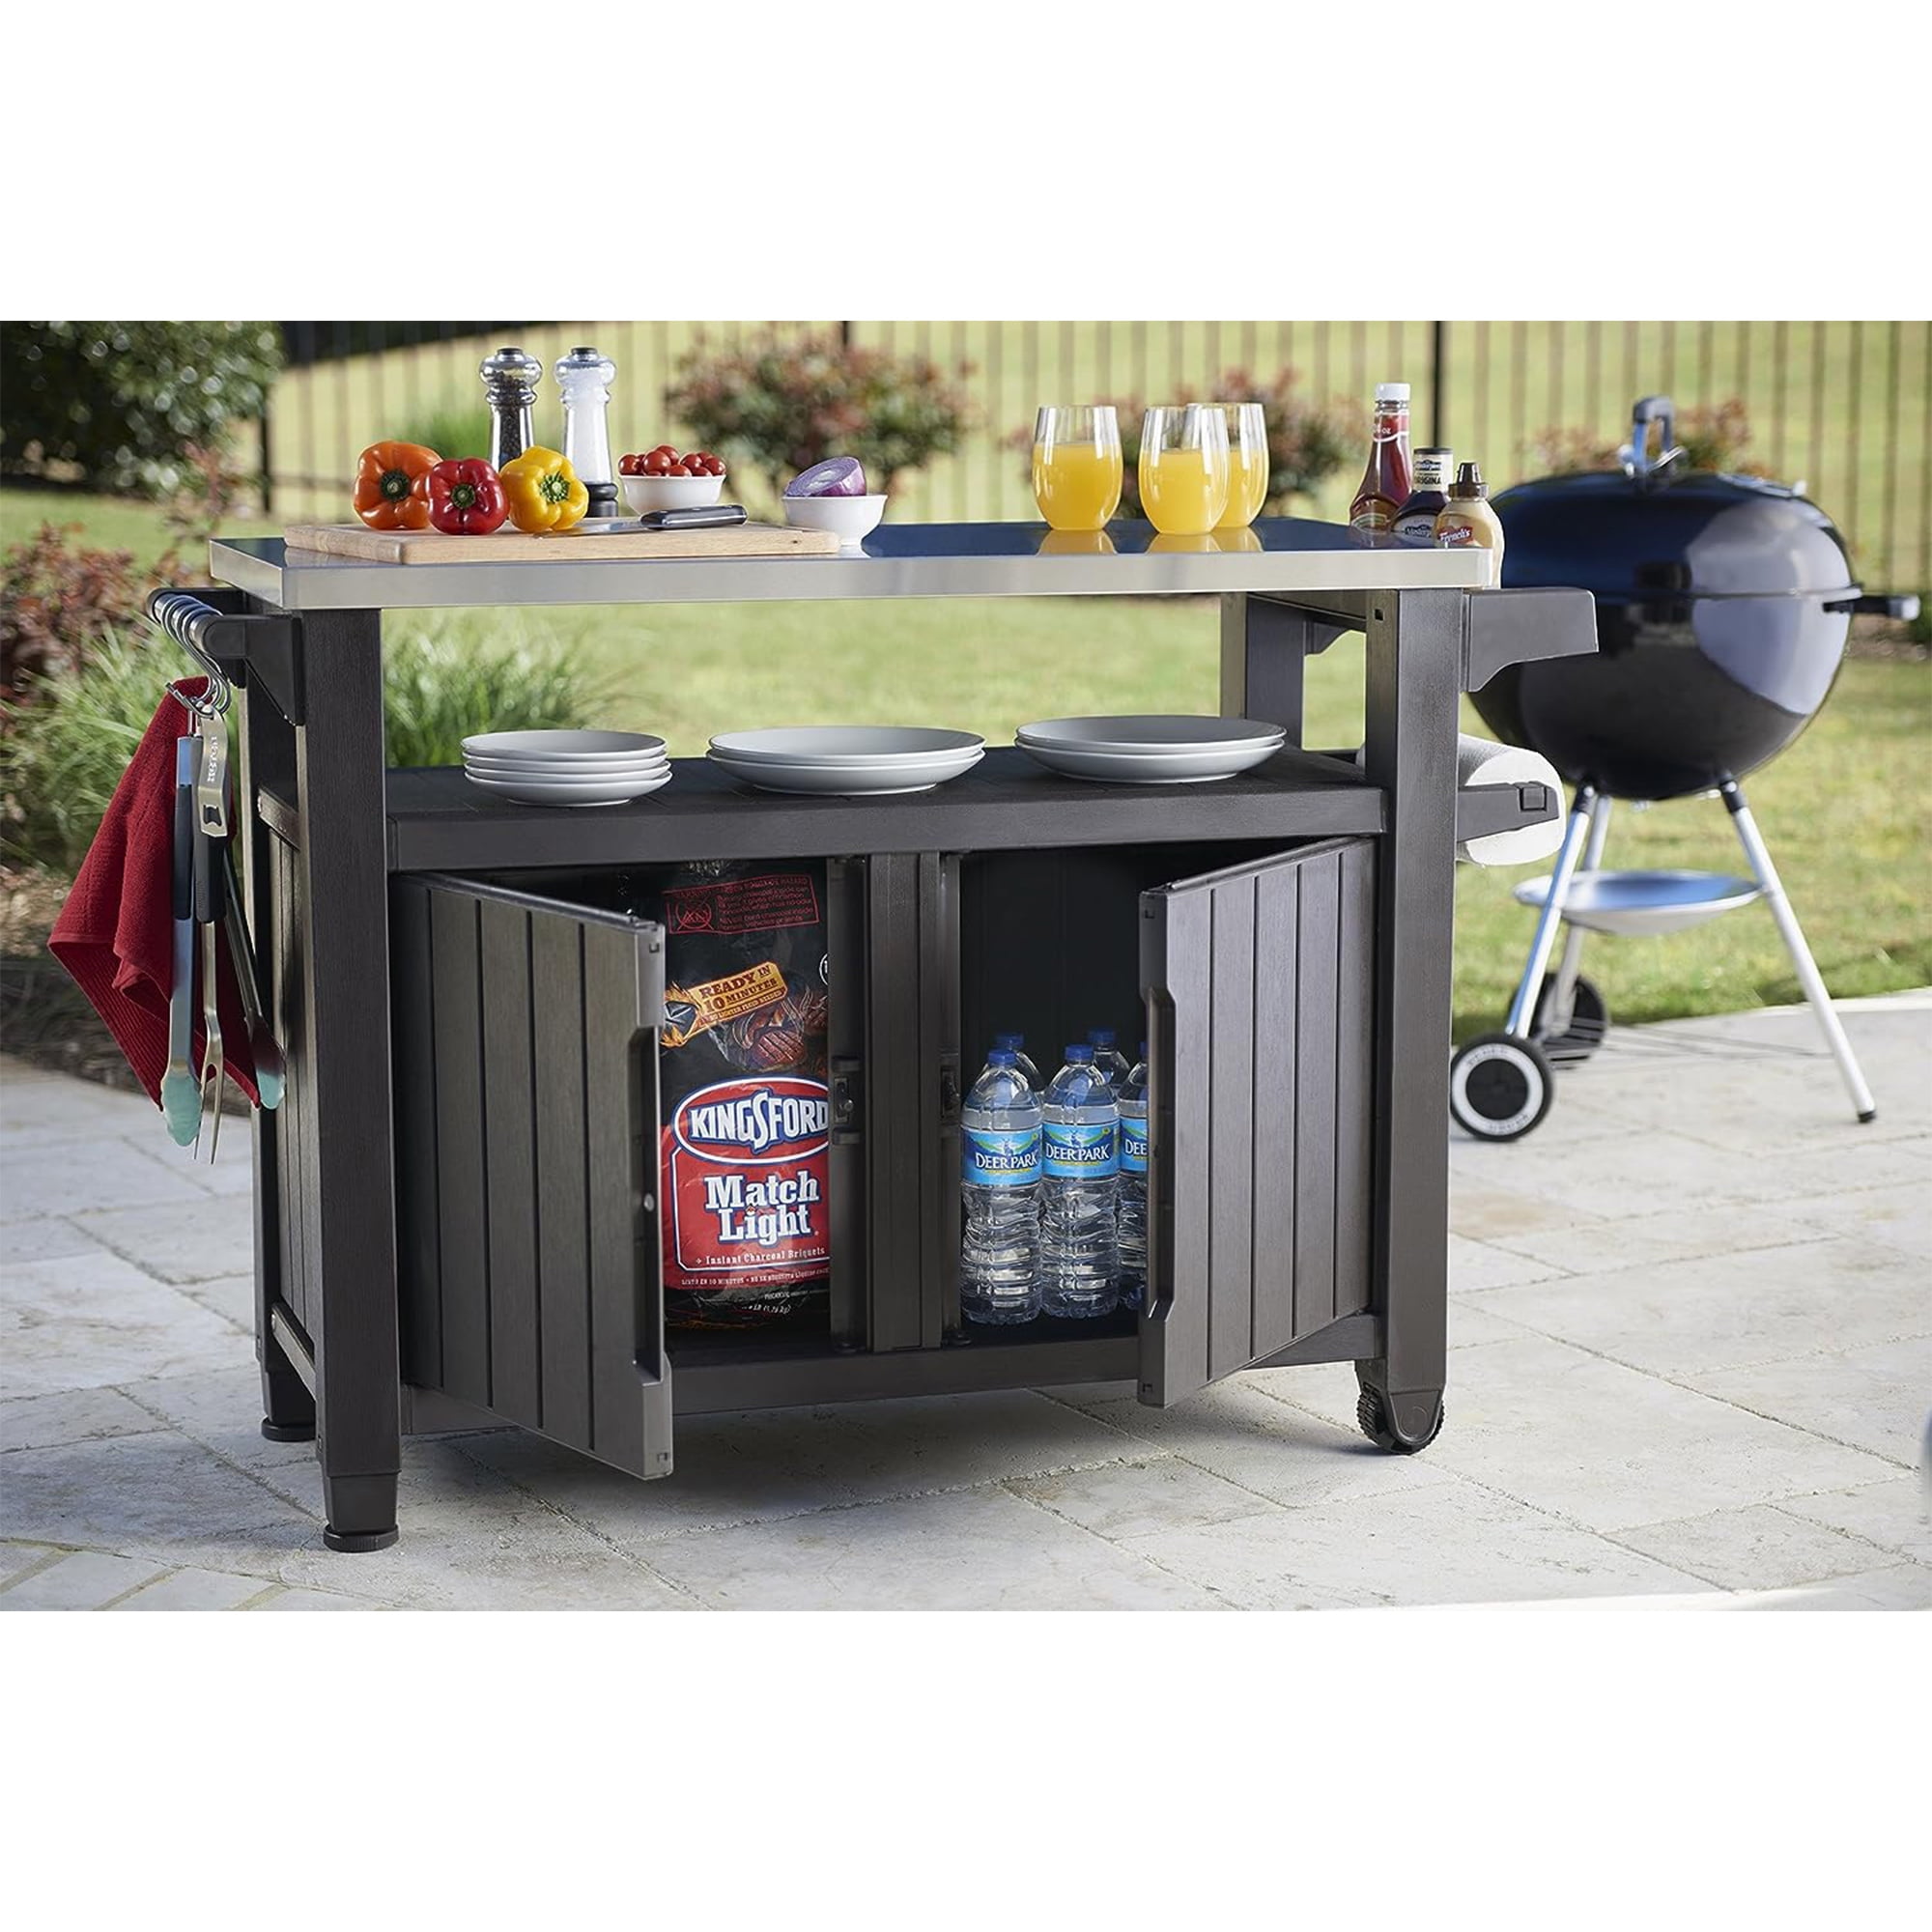 XL Cabinet, Kitchen Brown Rolling Bar Unity Keter Storage Cart Outdoor with